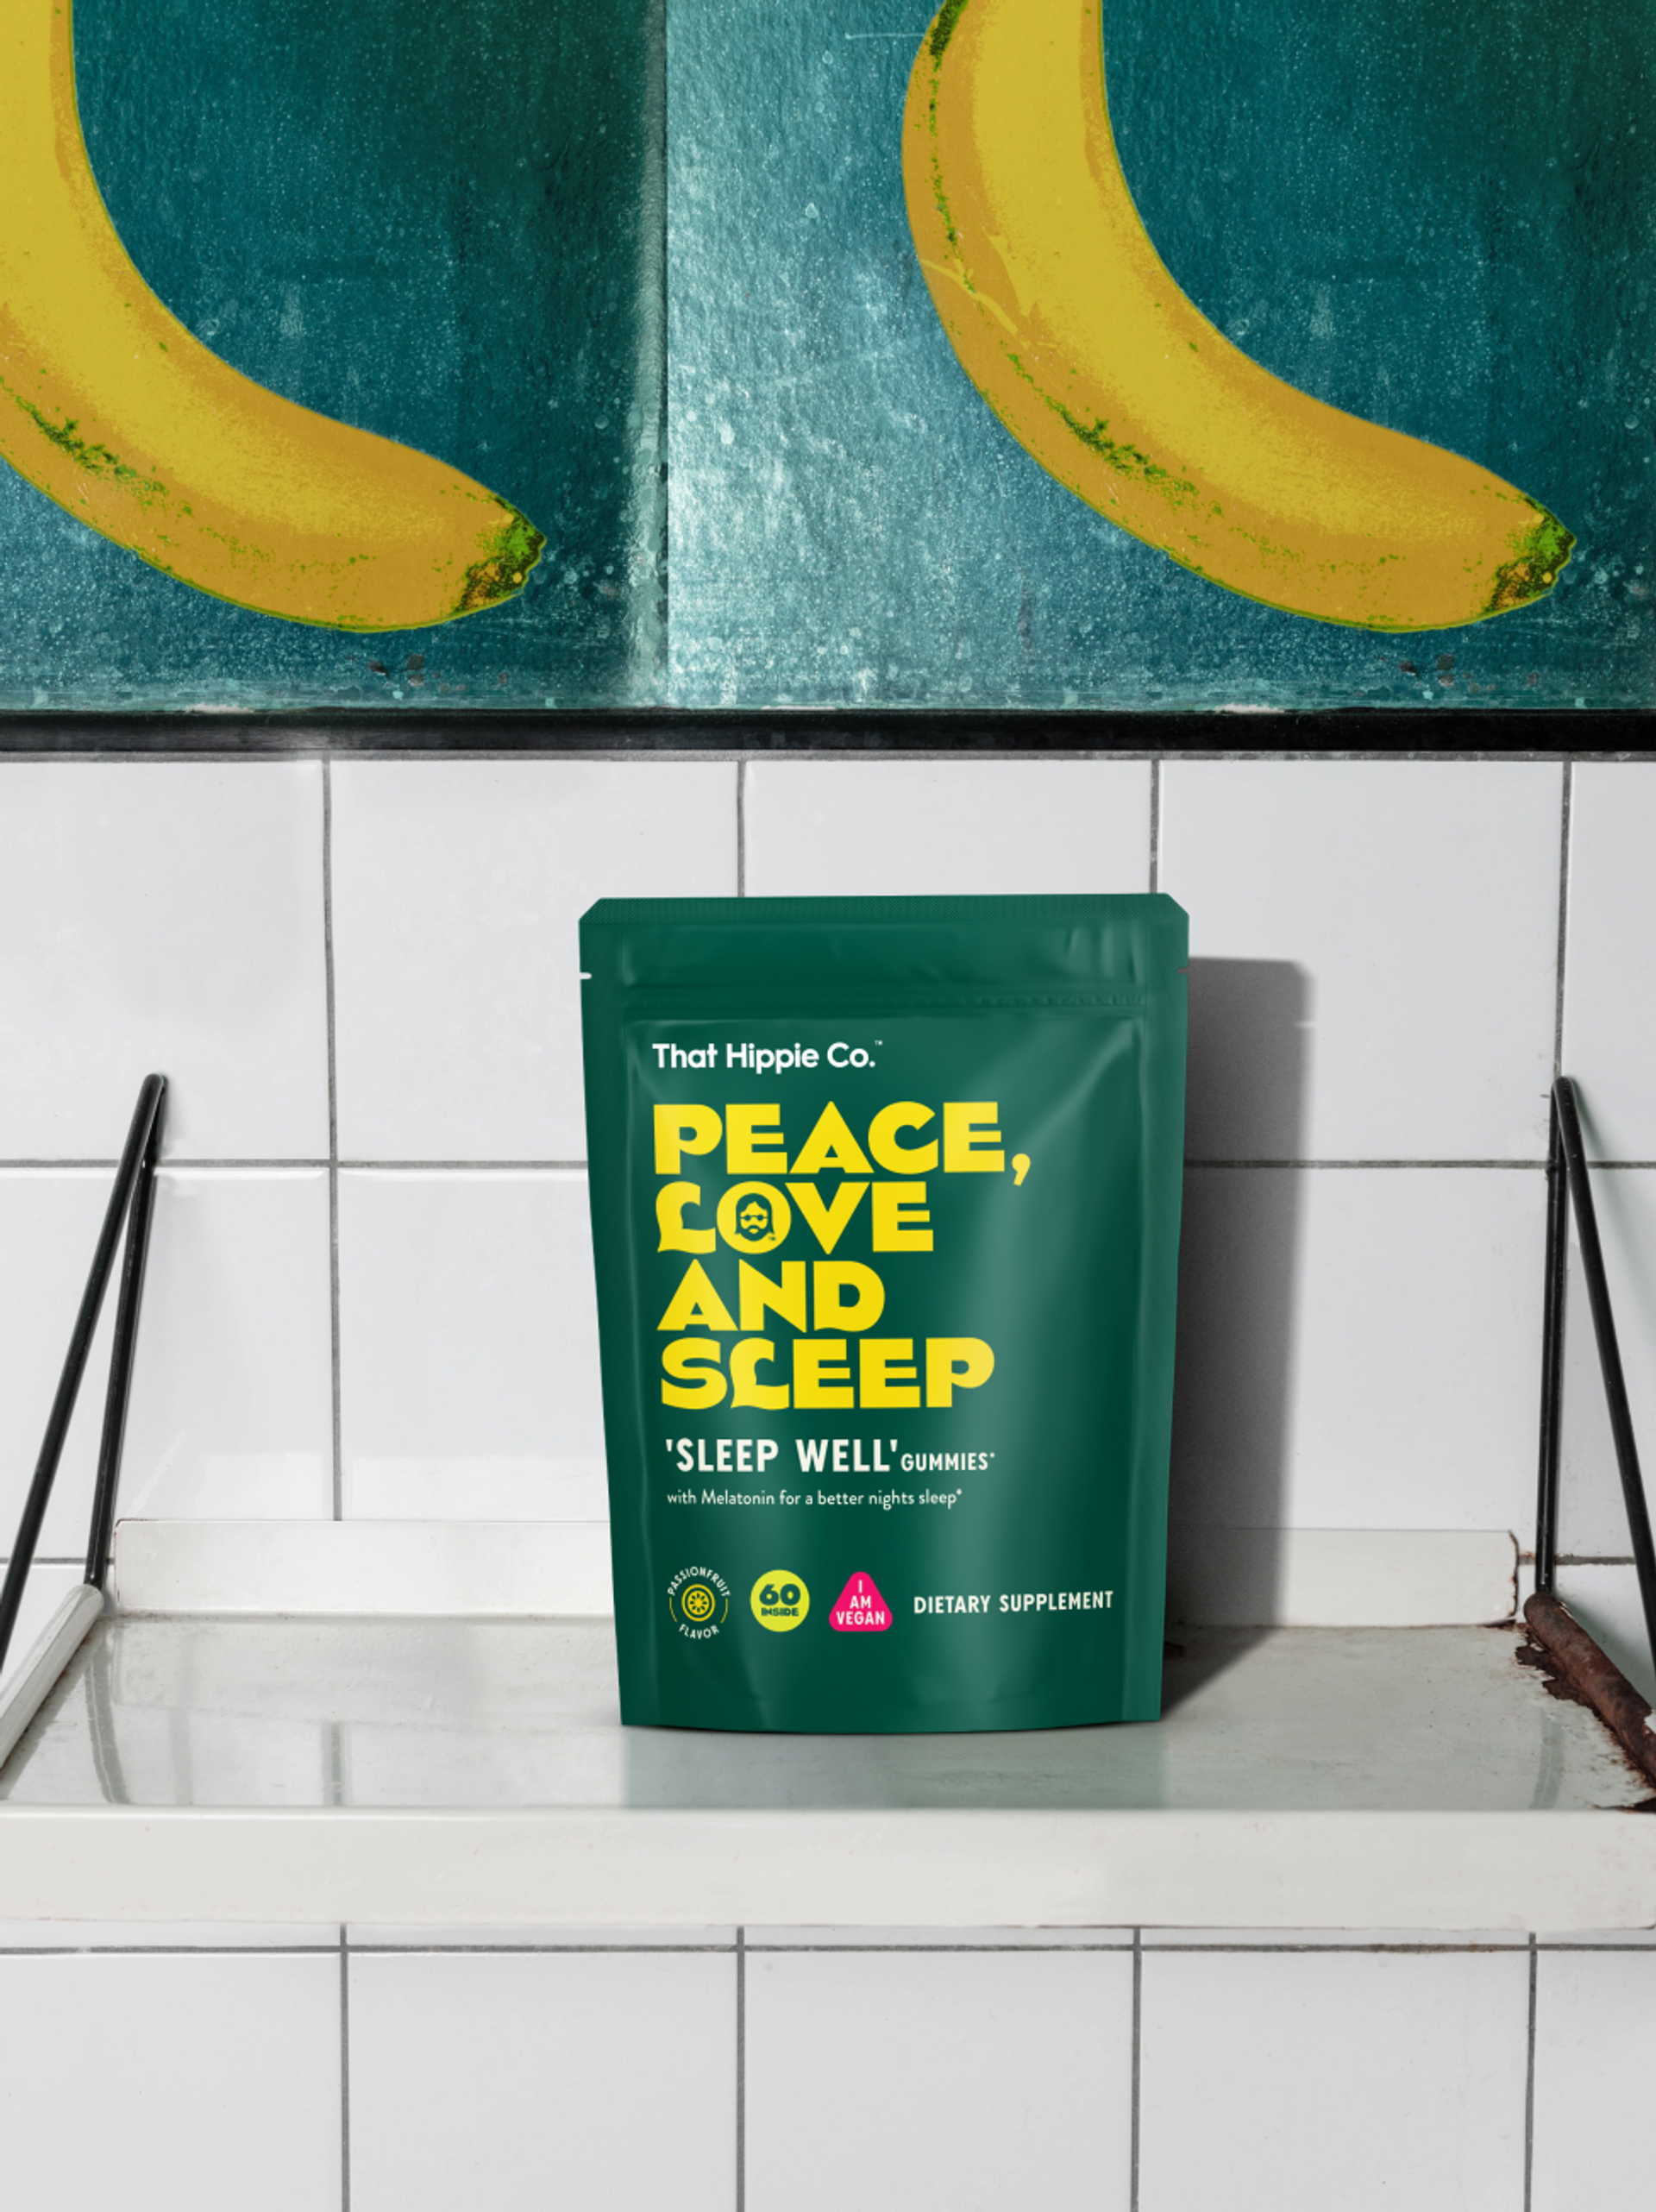 Gummies packaging design for That Hippie Co. “Sleep Well” gummies by London brand agency Our Revolution in a tiled kitchen, under a painted cupboard depicting two bananas